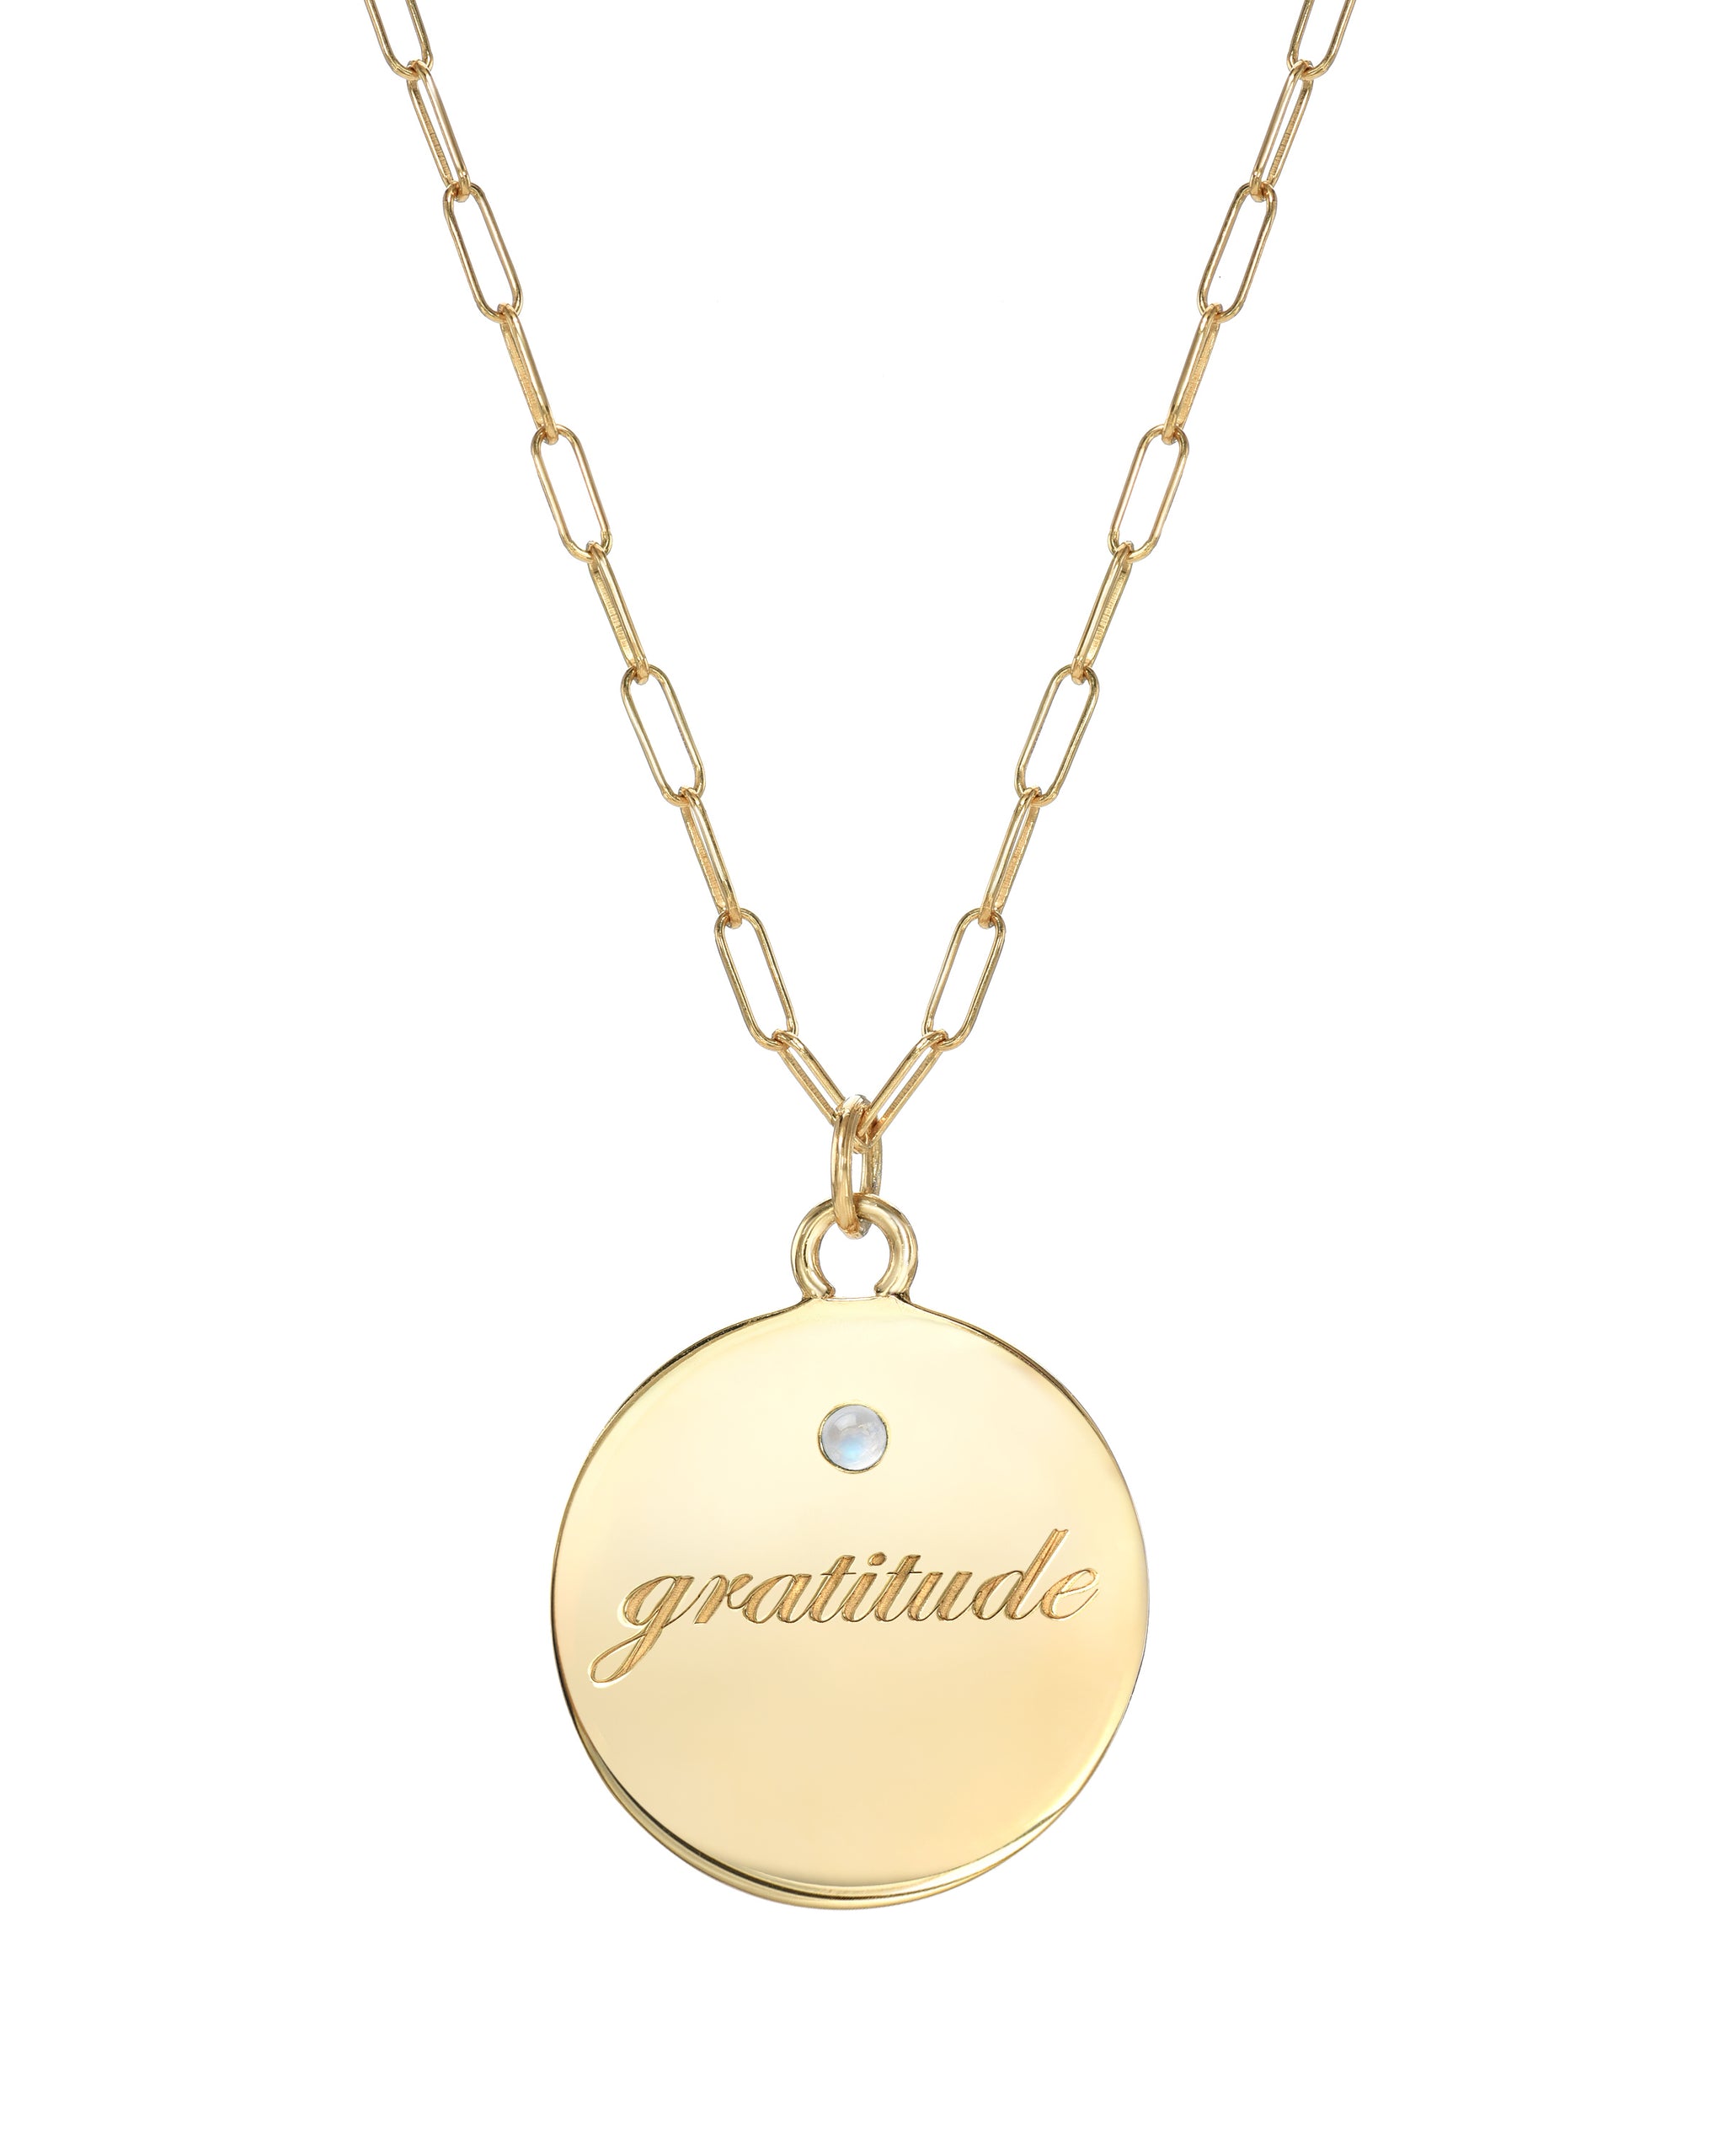 Gratitude Necklace, Gold Vermeil Medallion with Gratitude engraved and a 2mm semi-precious stone. Handmade by Turquoise + Tobacco in Los Angeles, Calfifornia